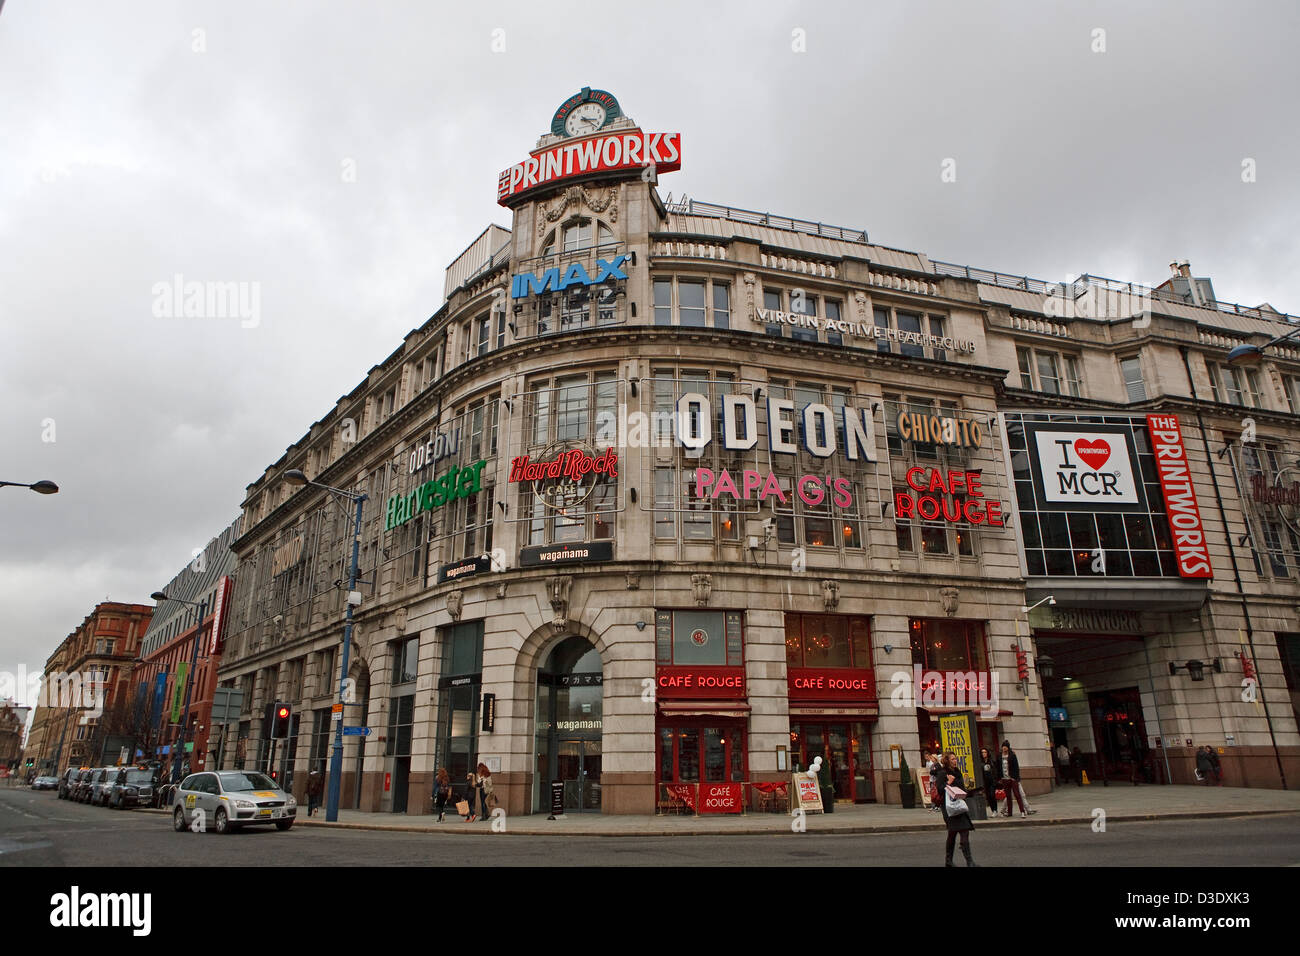 The odeon cinema in the printworks in Manchester England Stock Photo